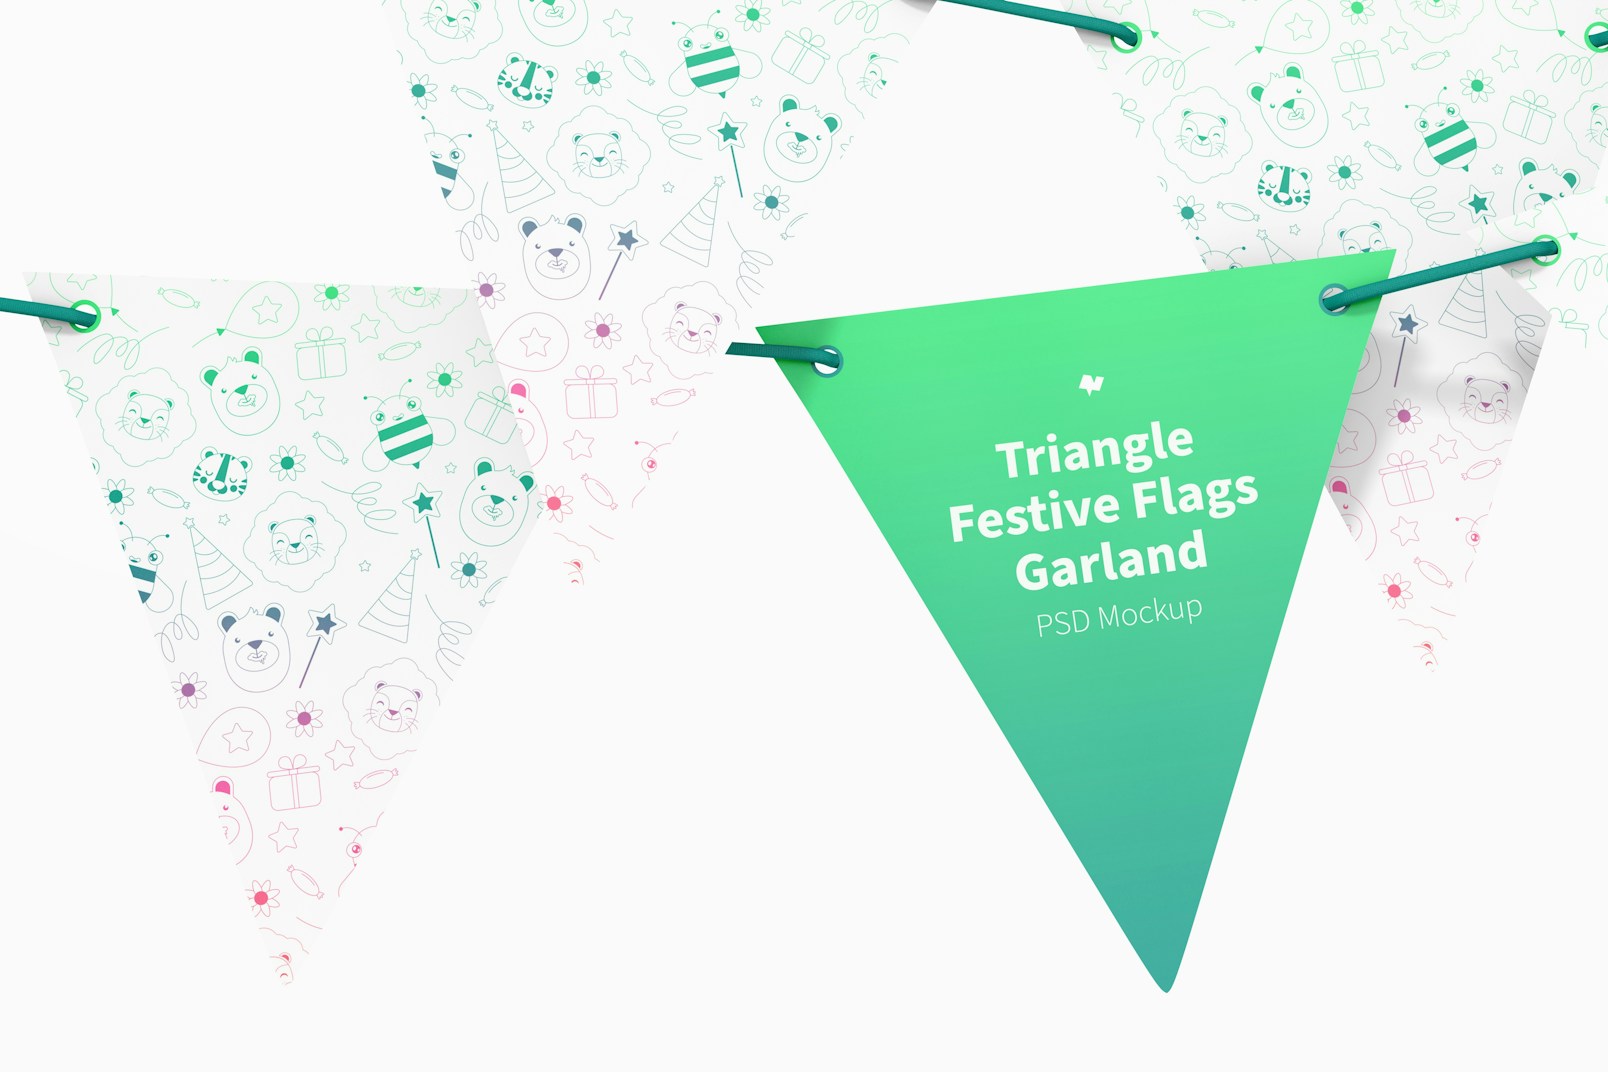 Triangle Festive Flags Garland Mockup, Front View